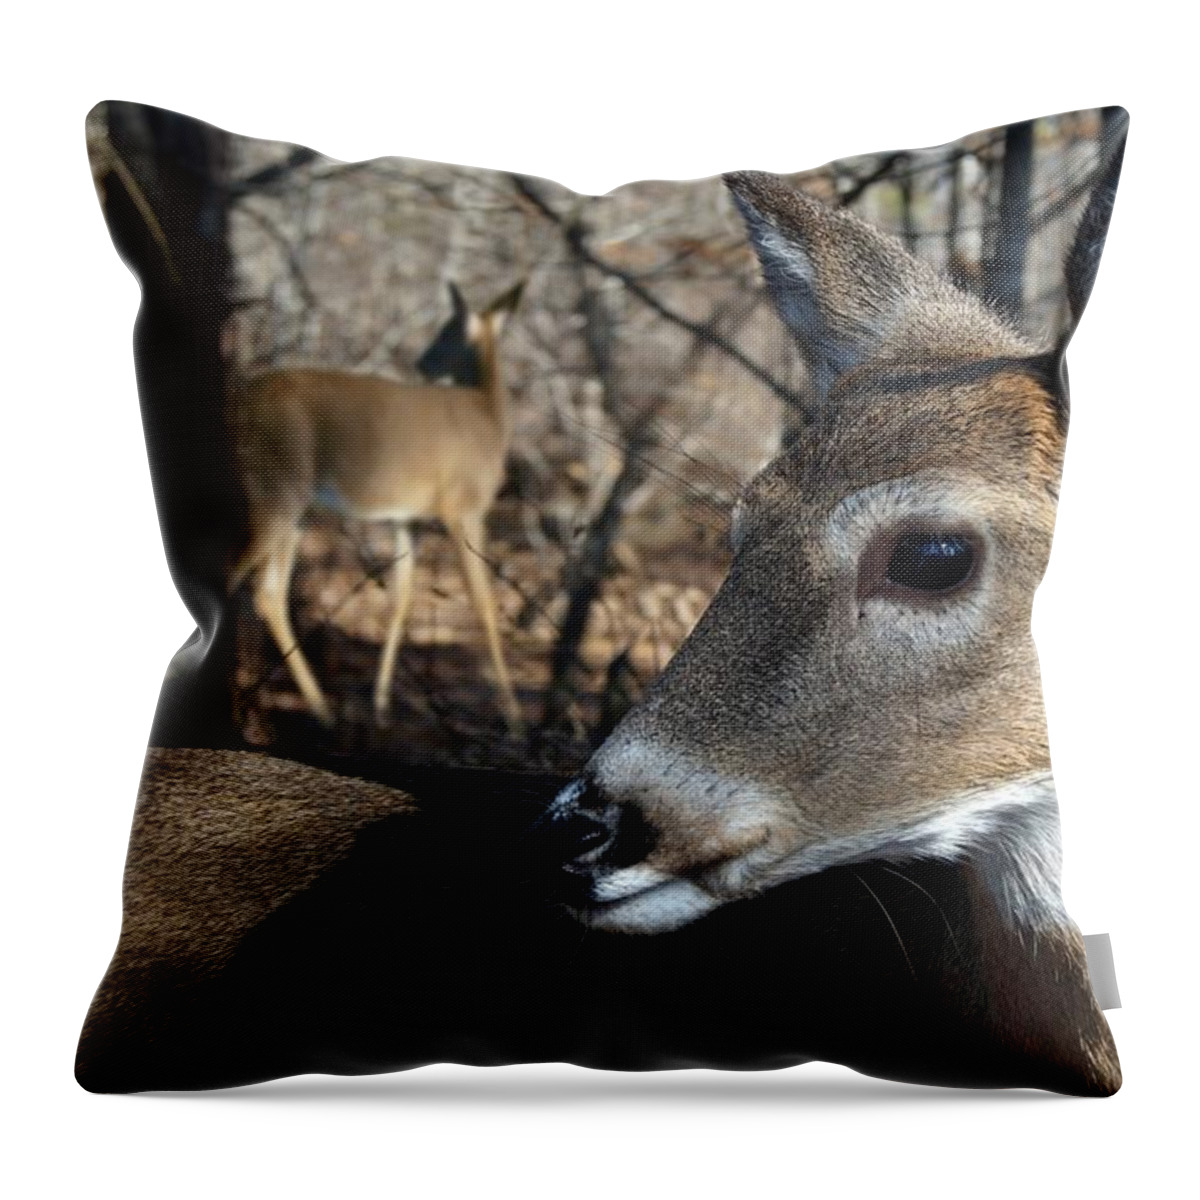 Deer Throw Pillow featuring the photograph Too Cool by Bill Stephens